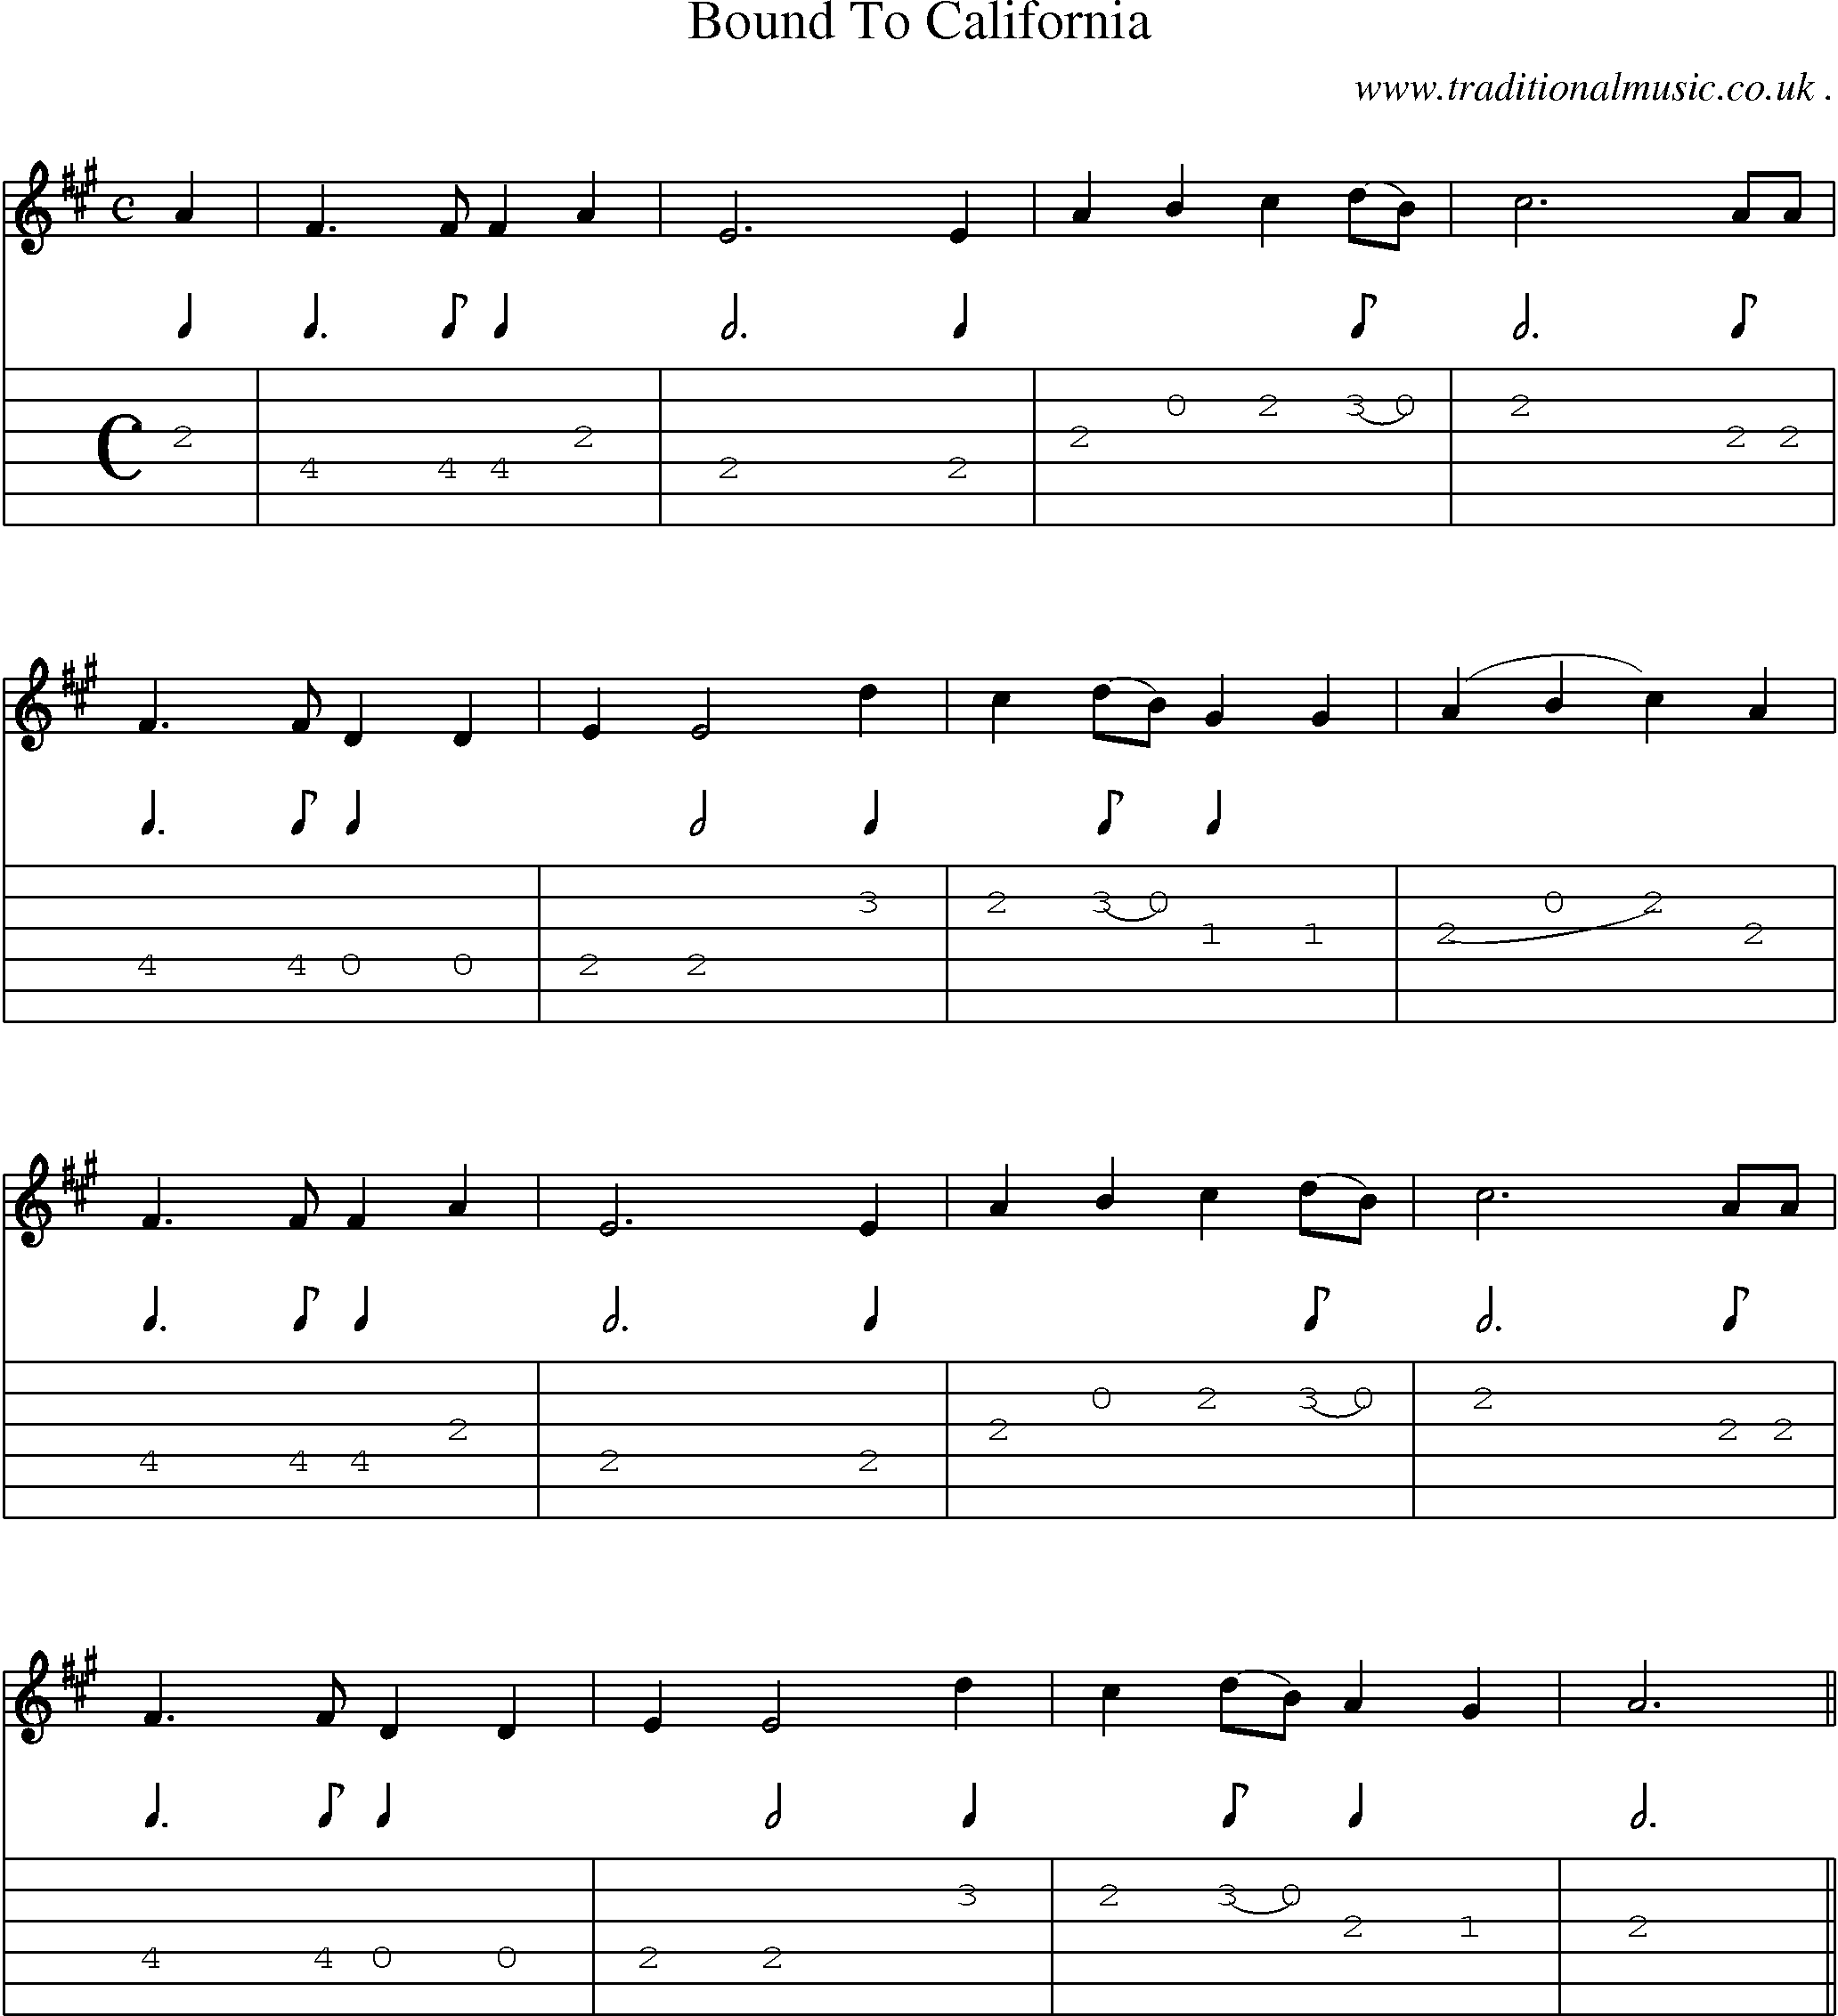 Sheet-Music and Guitar Tabs for Bound To California